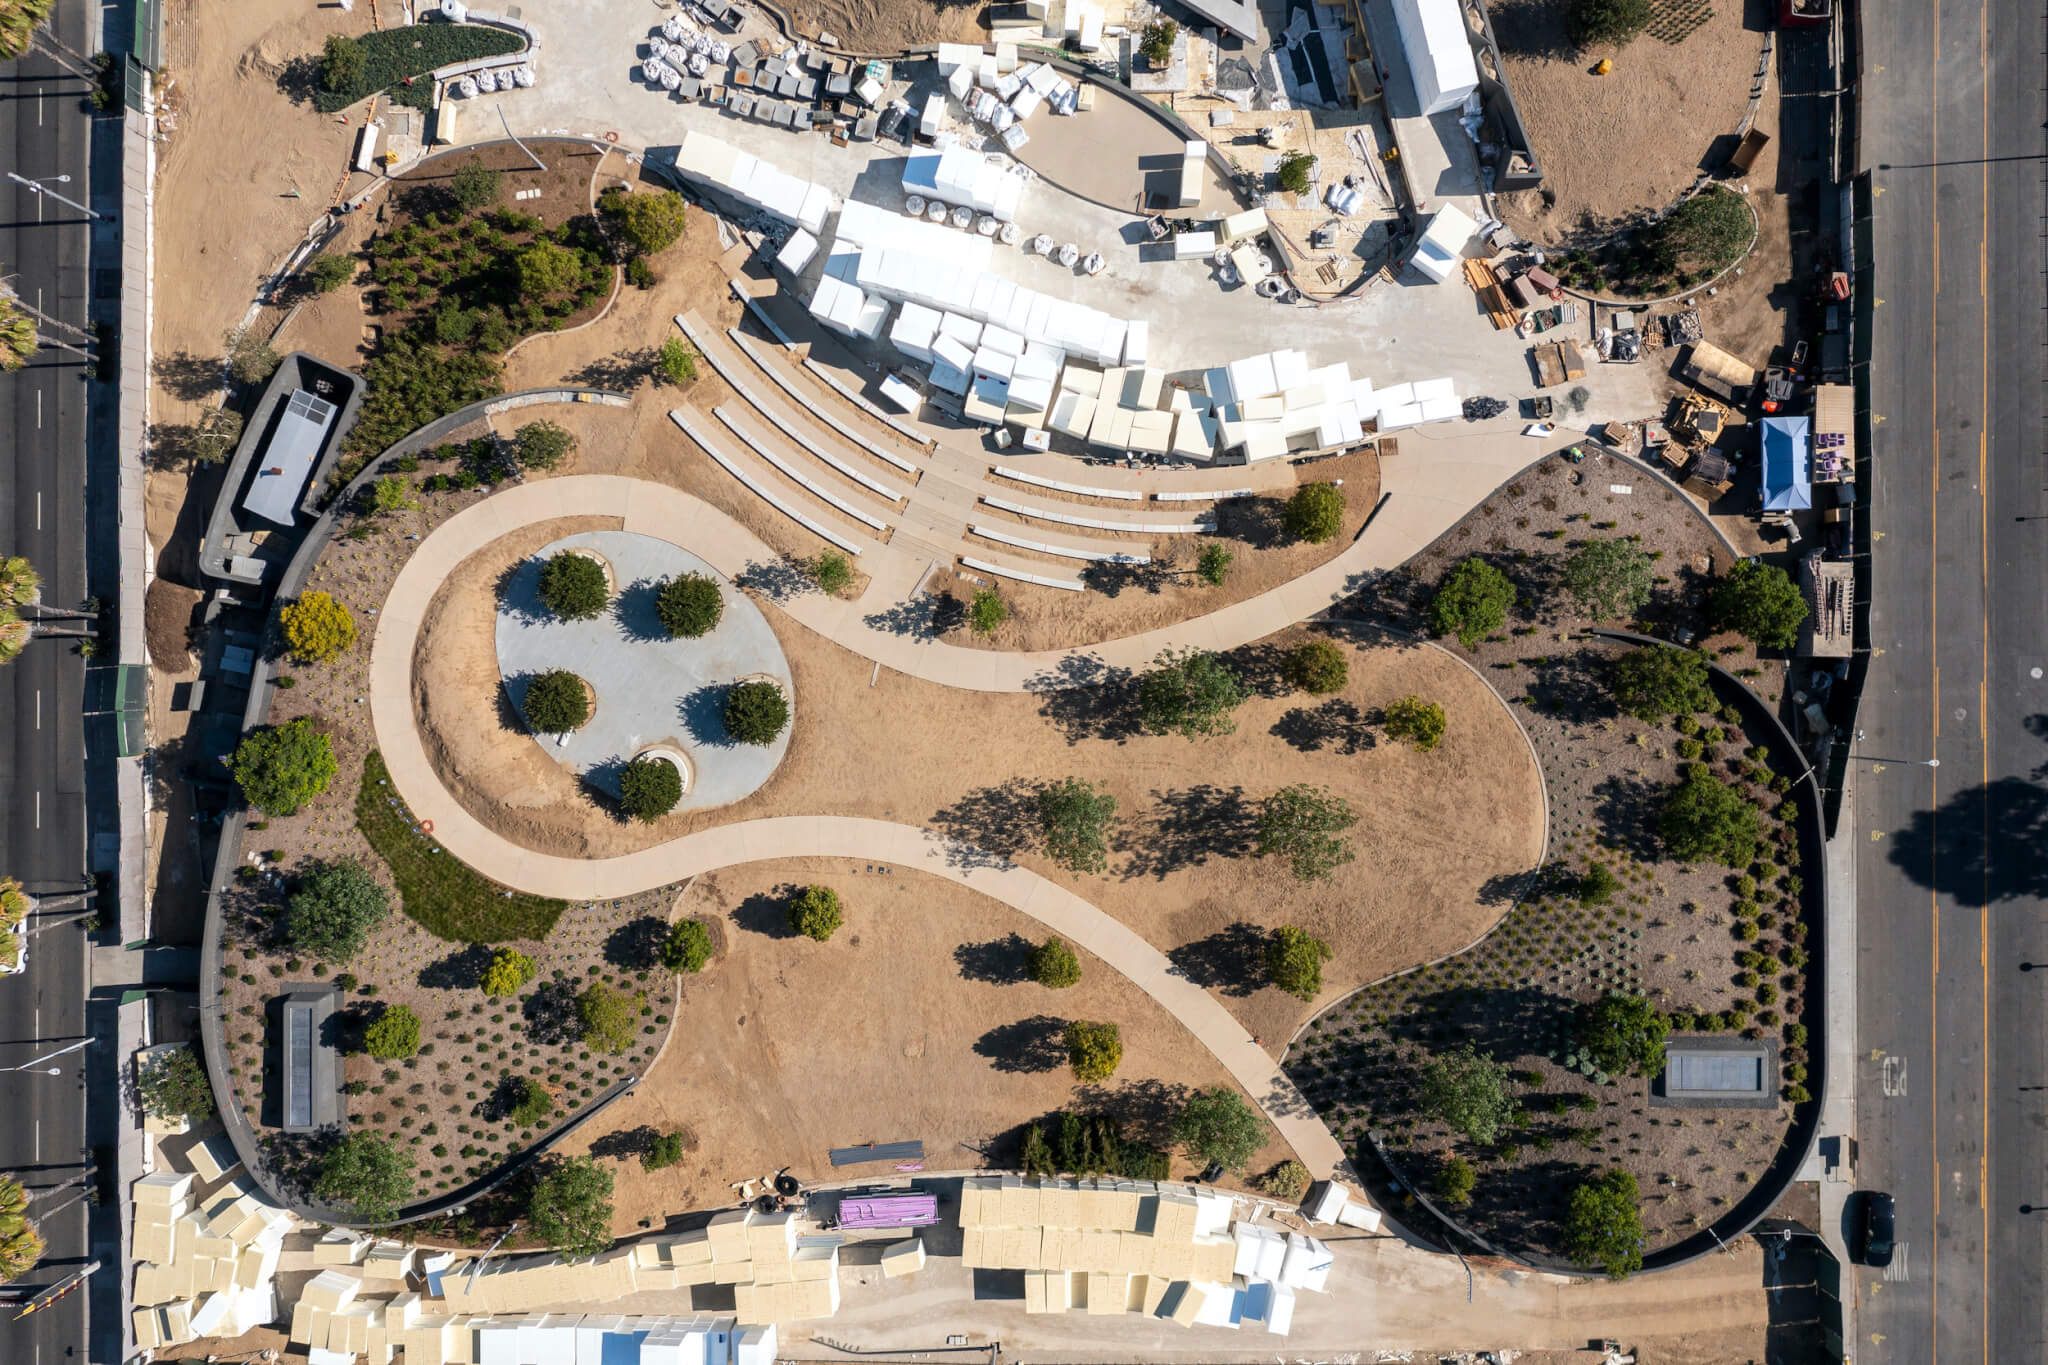 Aerial view of the park area on a museum campus